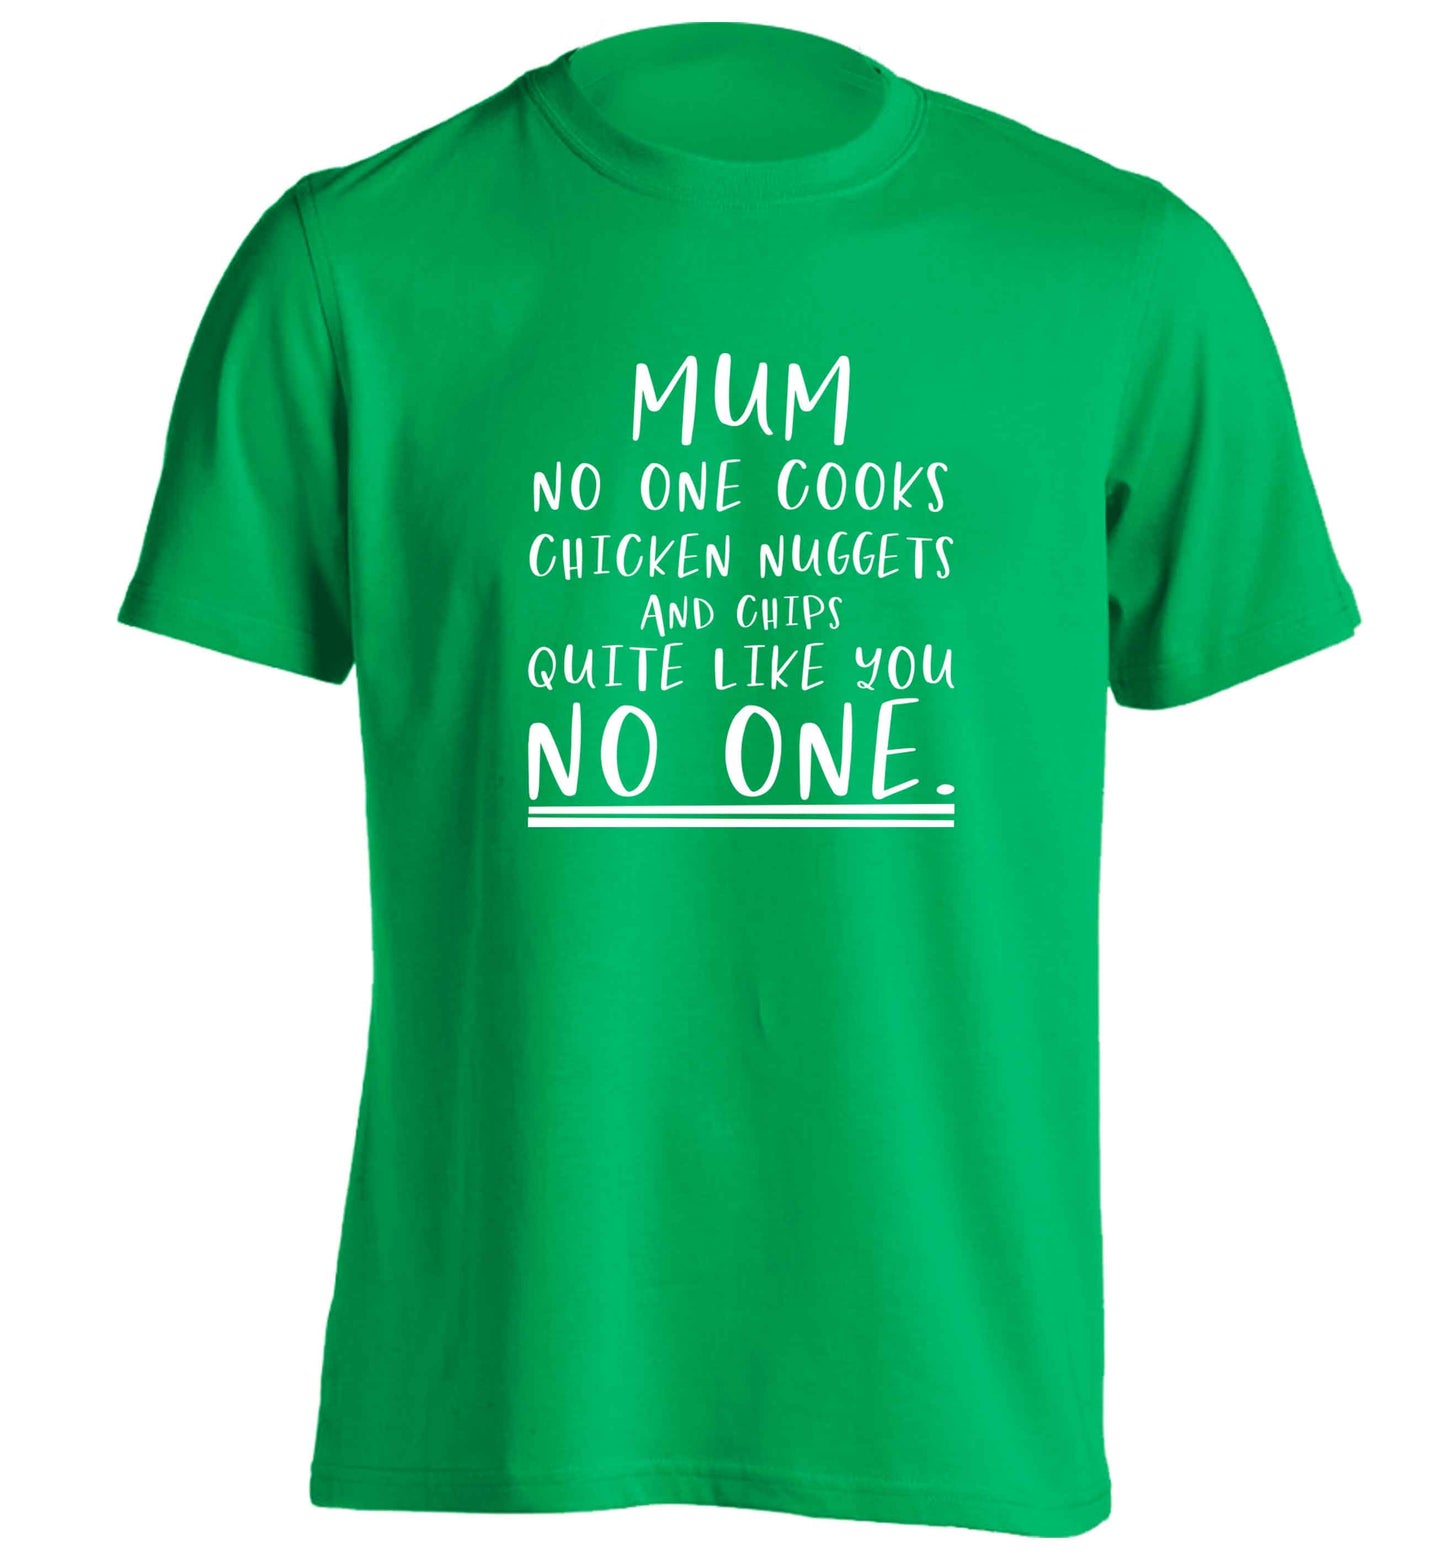 Super funny sassy gift for mother's day or birthday!  Mum no one cooks chicken nuggets and chips like you no one adults unisex green Tshirt 2XL